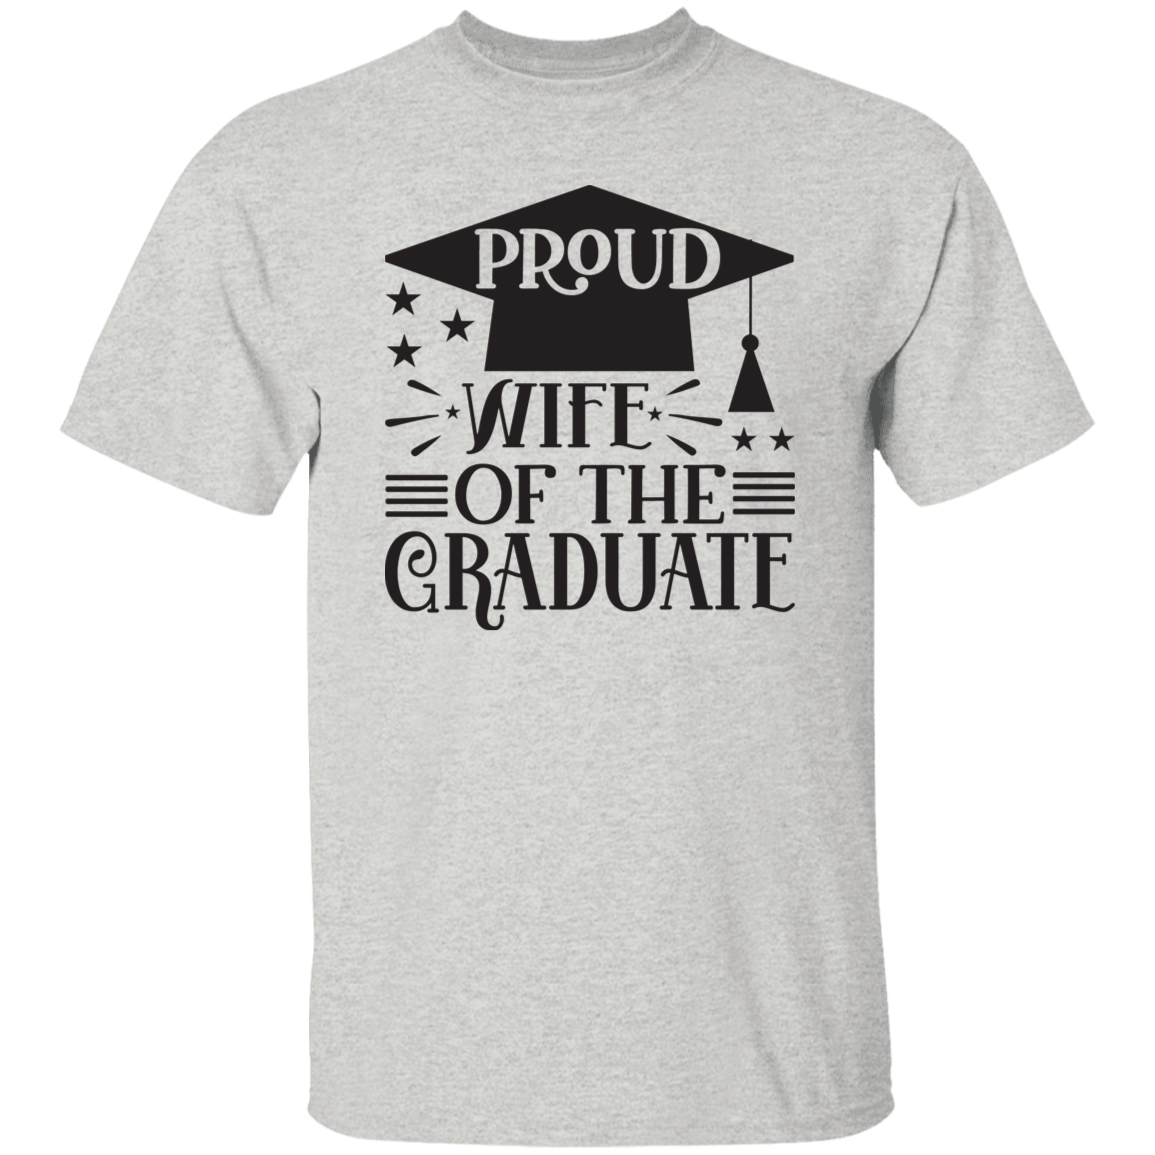 Wife of the Graduate 5.3 oz. T-Shirt